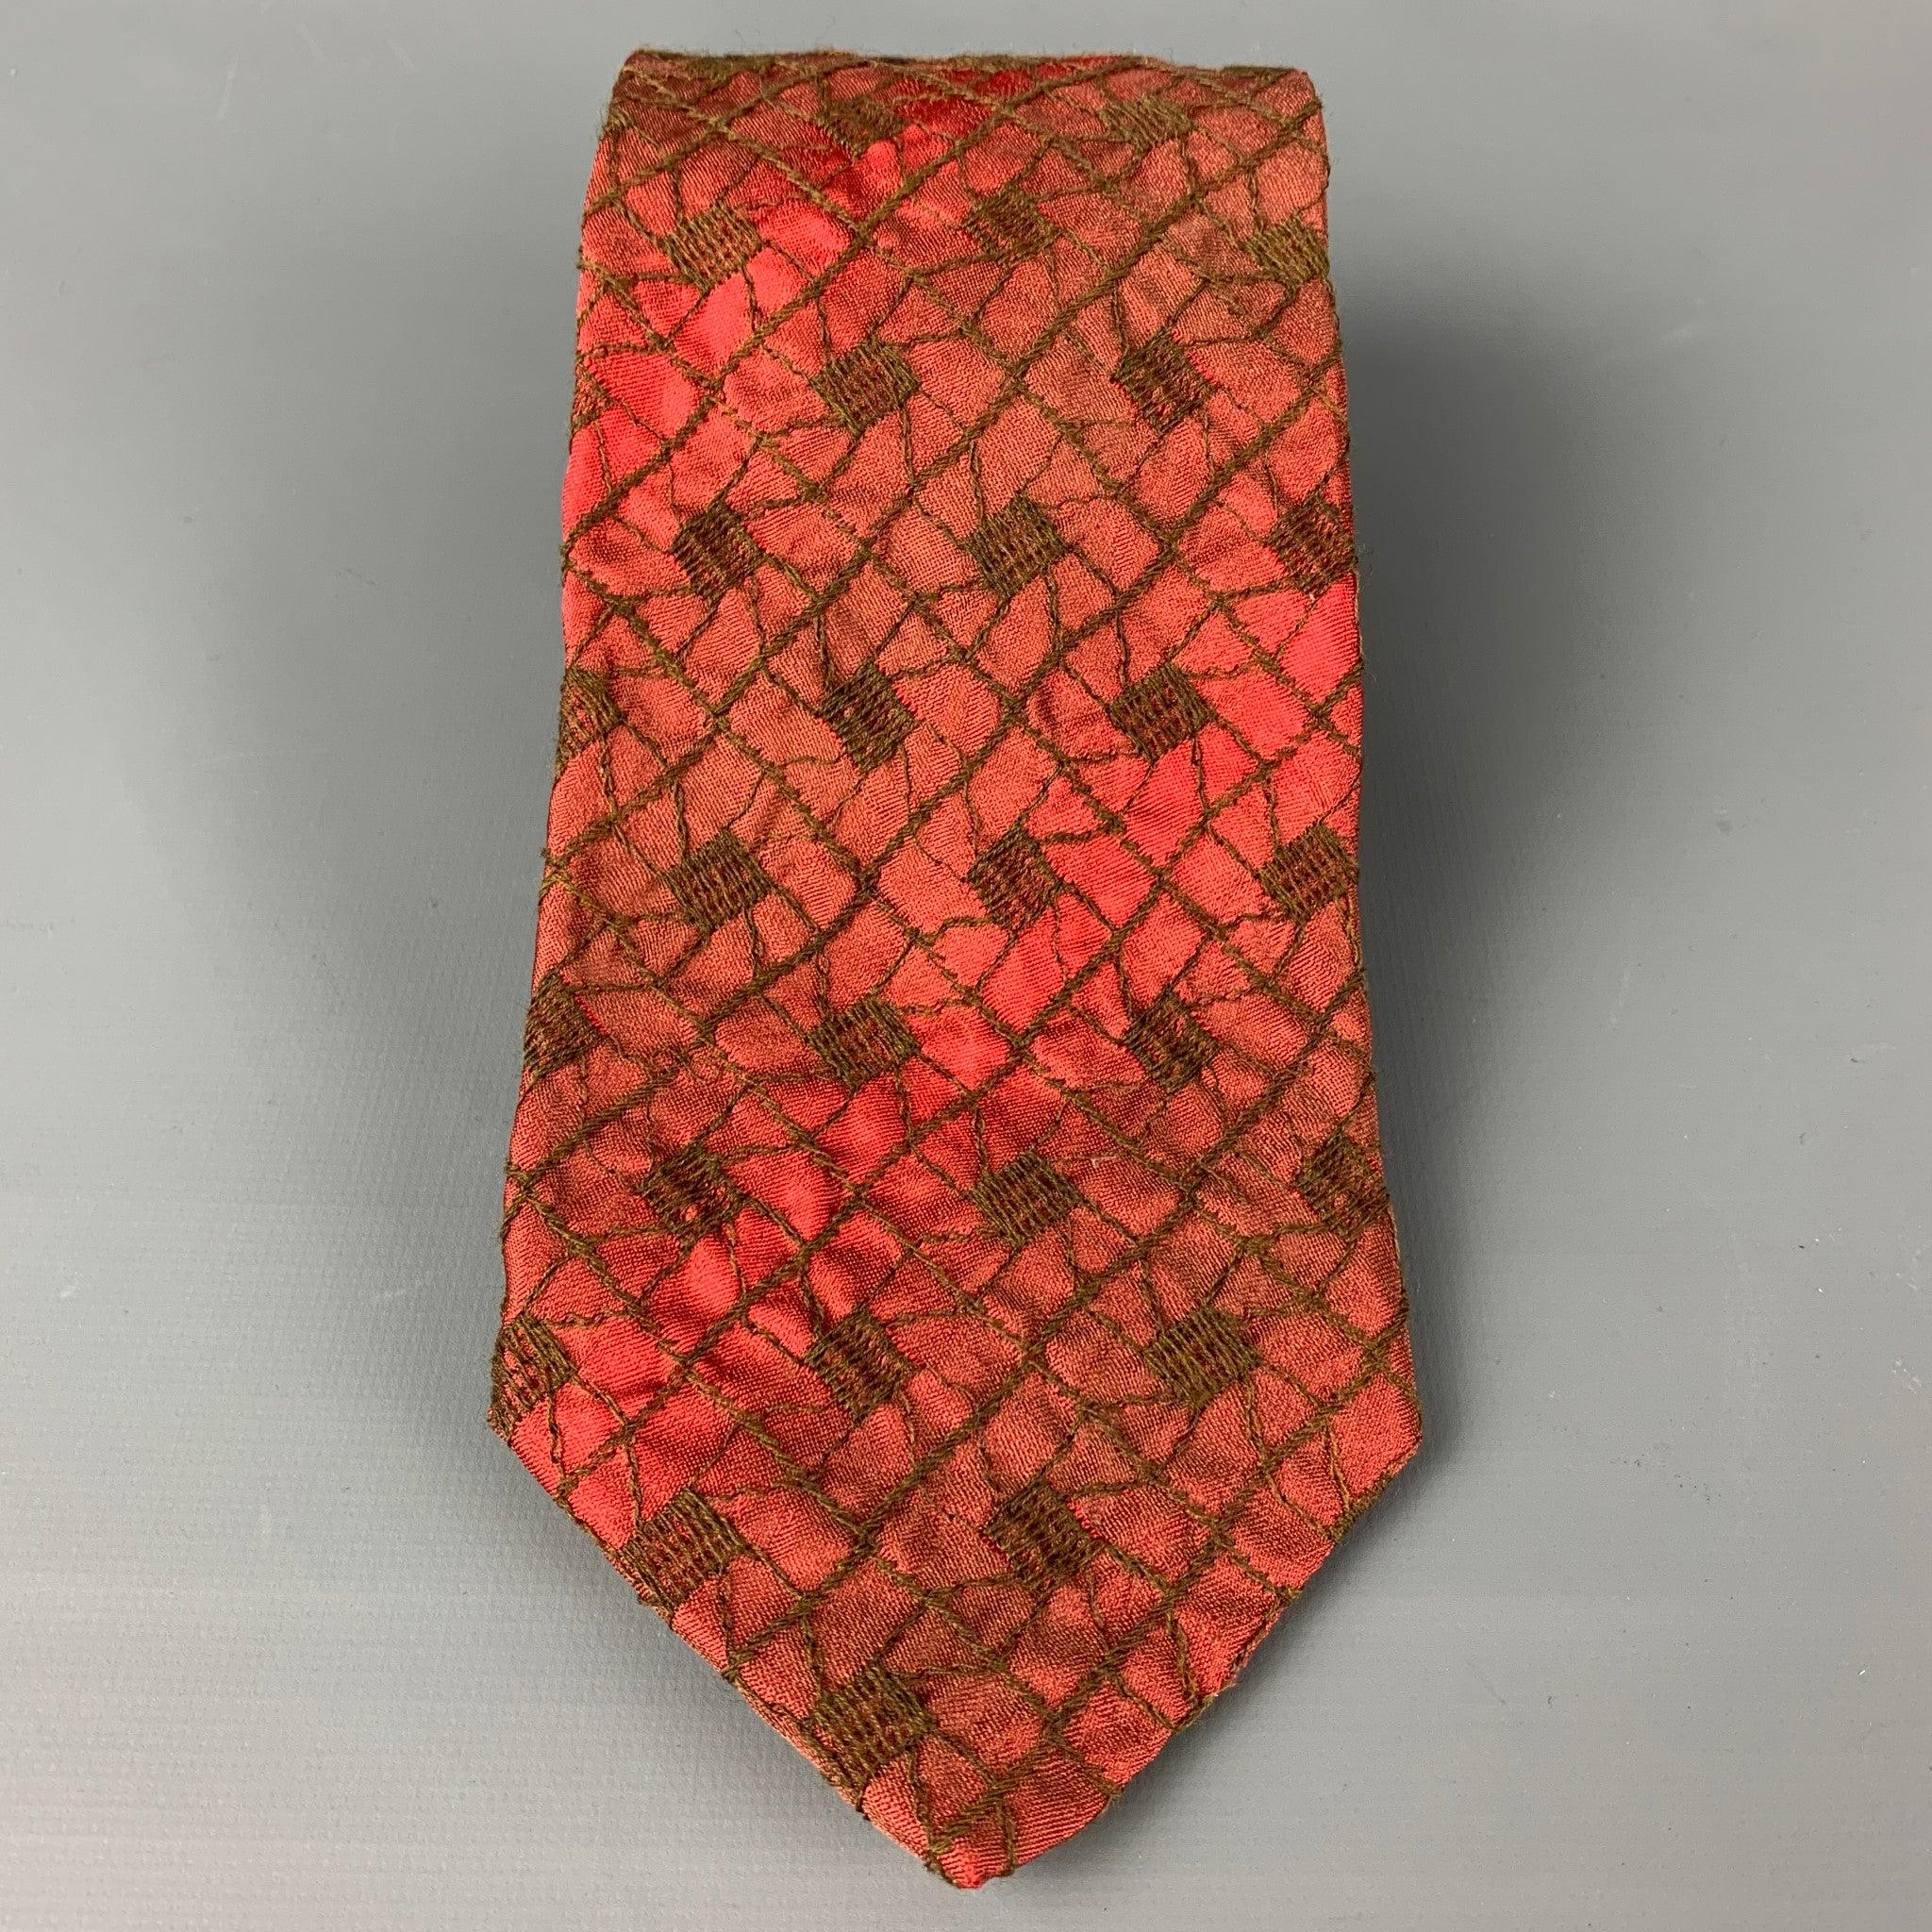 ROMEO GIGLI
 necktie comes in a red & brown silk with a all over embroidered print. Made in Italy. Very Good Pre-Owned Condition.Width: 3.75 inches 
  
  
  
 Sui Generis Reference: 118027
 Category: Tie
 More Details
  
 Brand: ROMEO GIGLI
 Color: